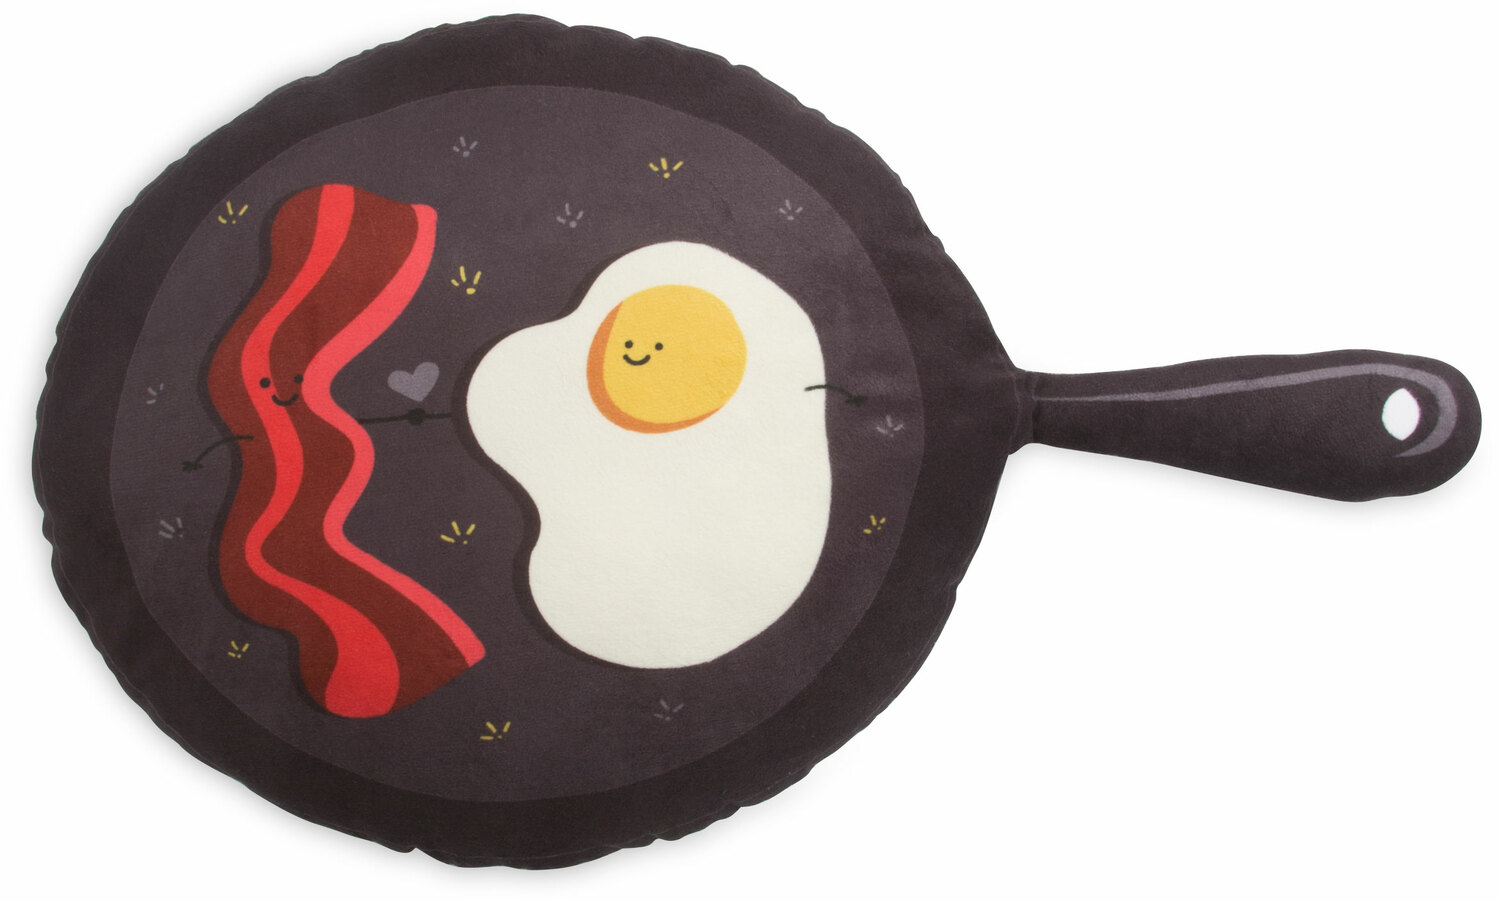 Bacon & Eggs by Late Night Snacks - Bacon & Eggs - 18.5" Character Pillow